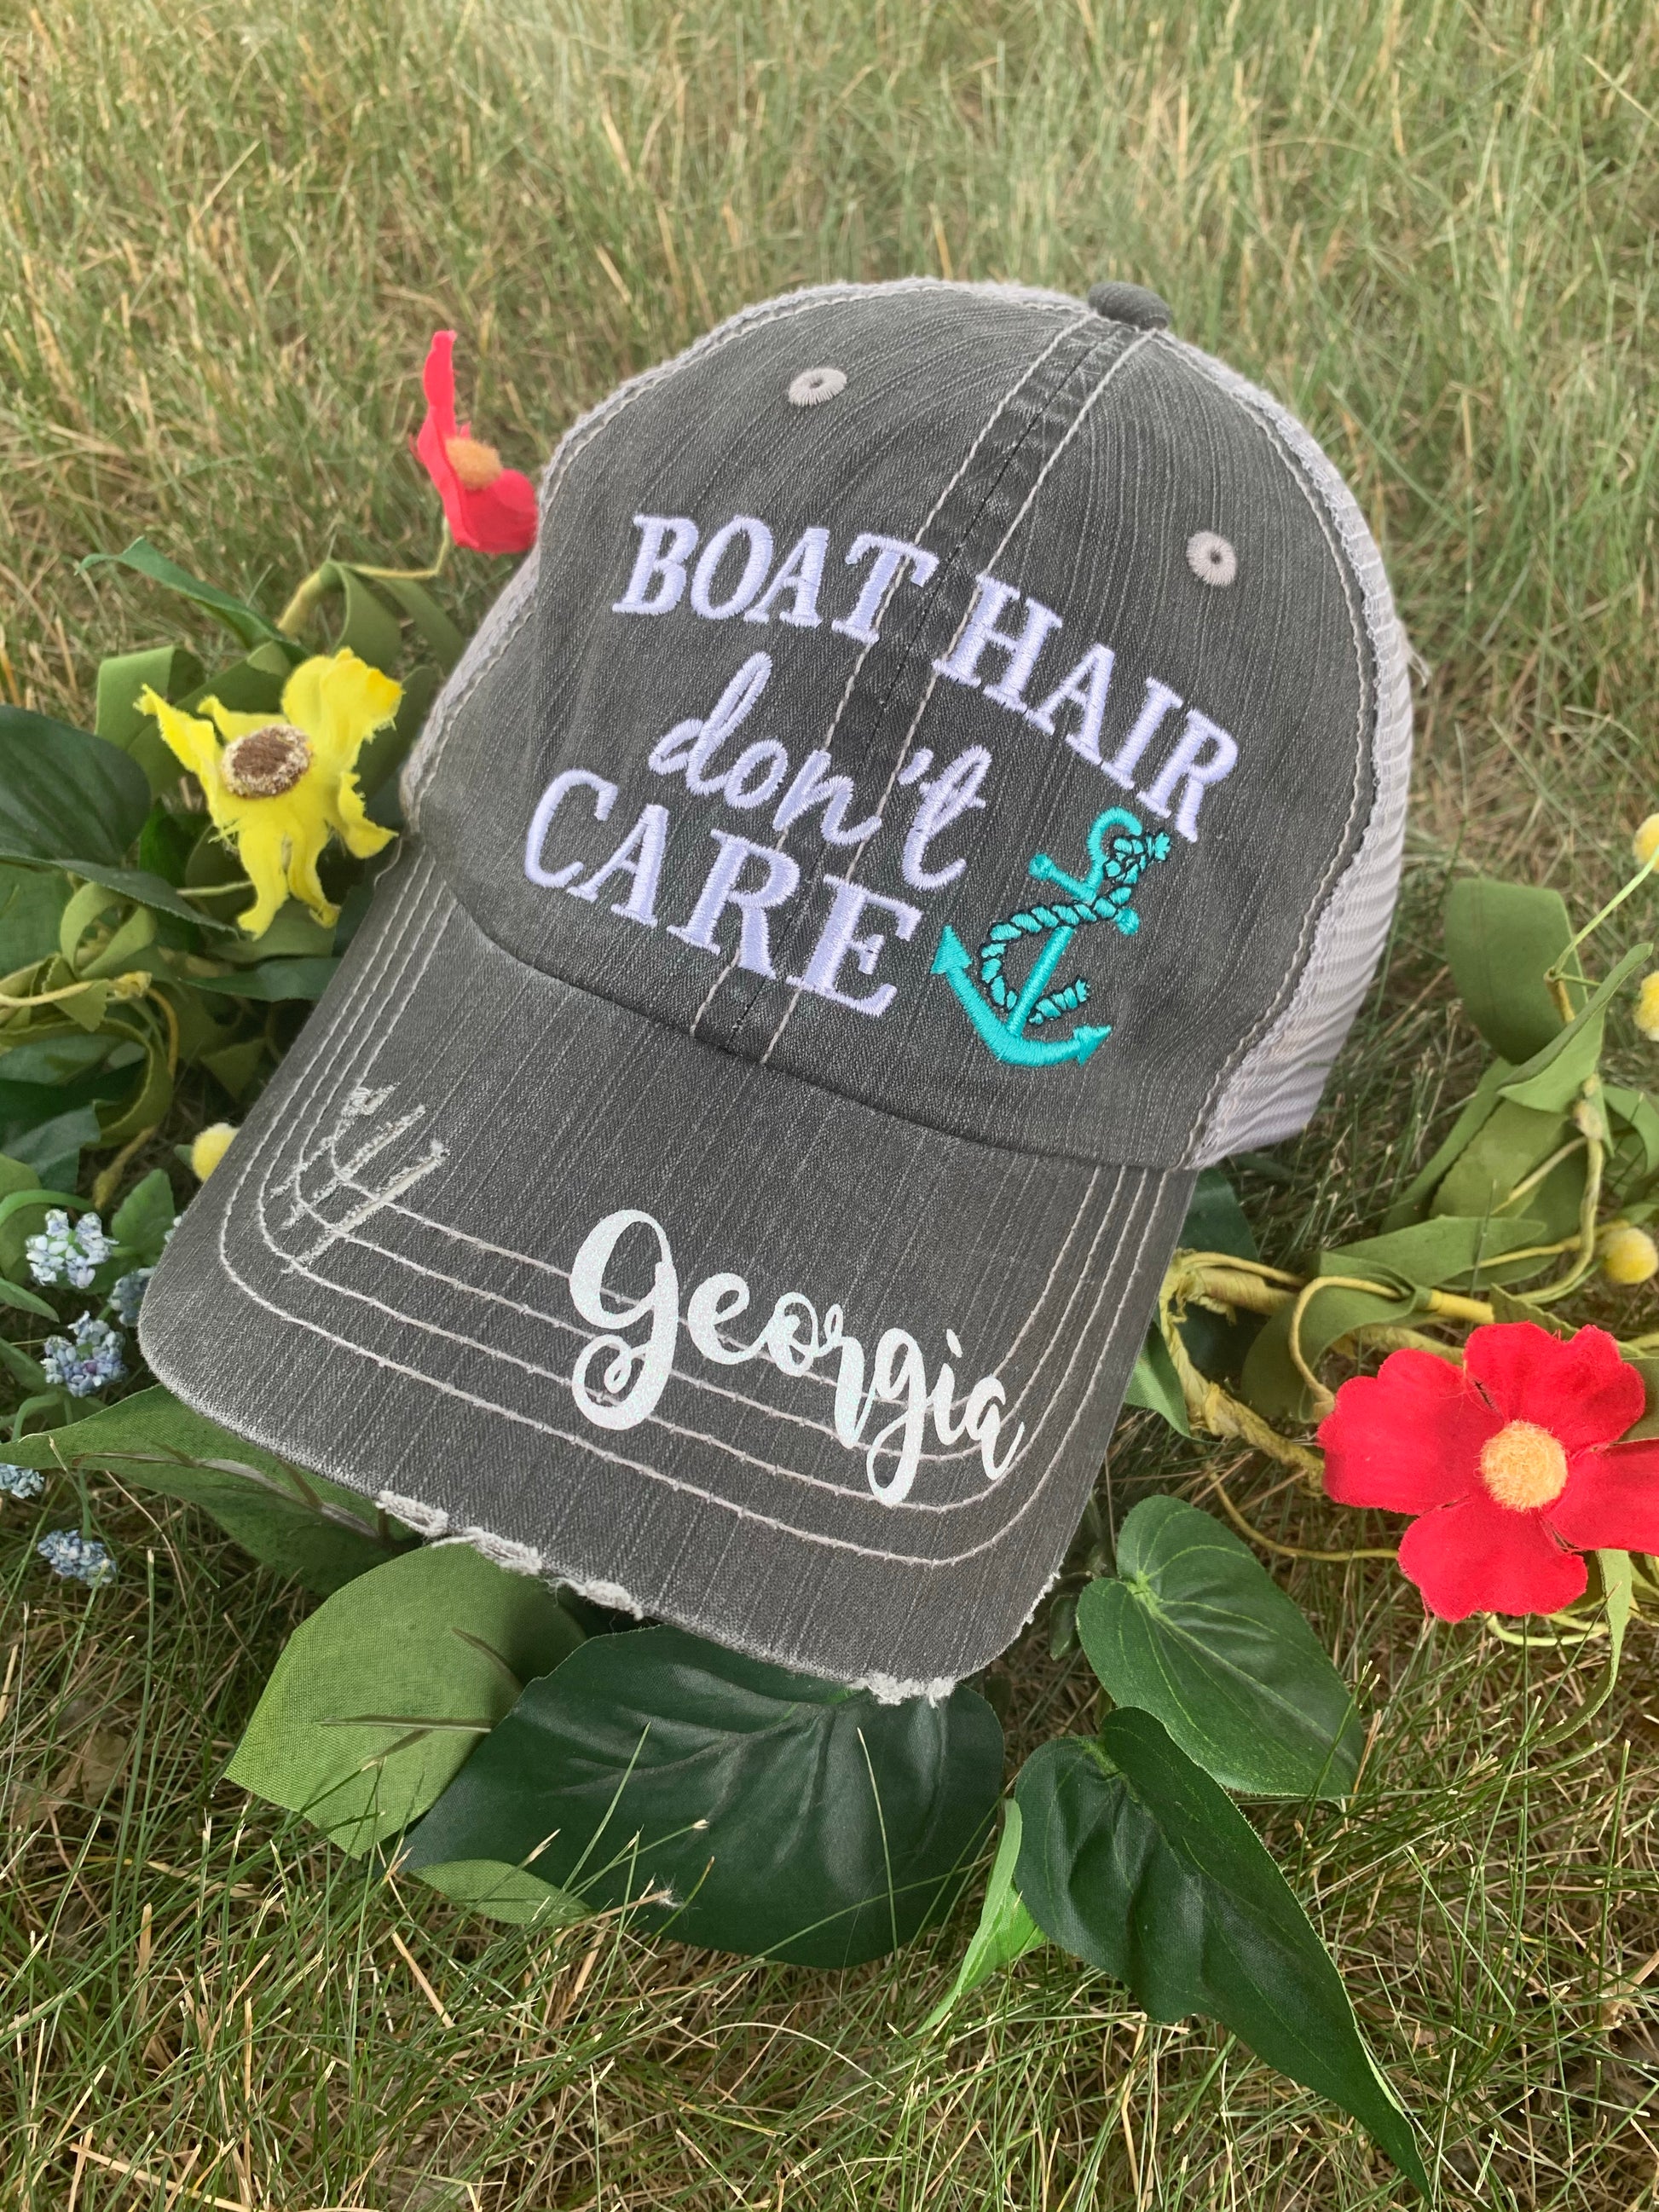 Boat Hats Boat Hair Dont Care Black Embroidered Trucker Cap Adjustable Mesh Back Hat. Boat Hair Don’t Care. Dark Gray Hat. Teal Waves, White Anchor. /